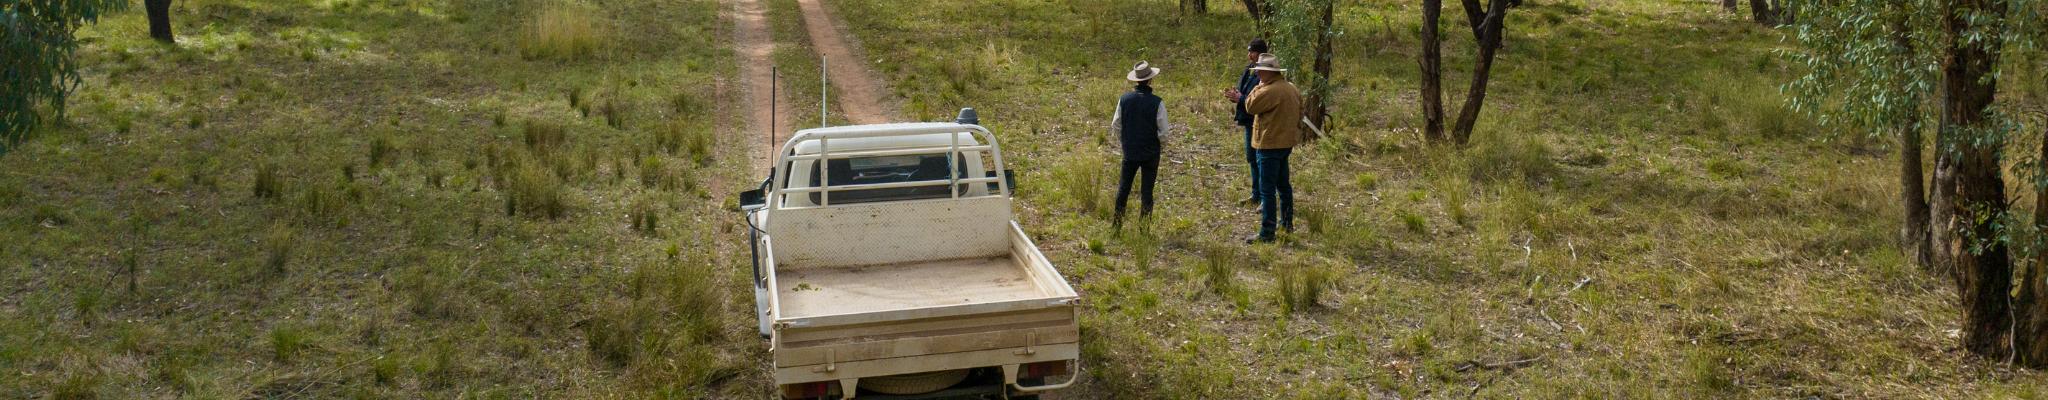 Liverpool Plains Cracking Clays conservation tender